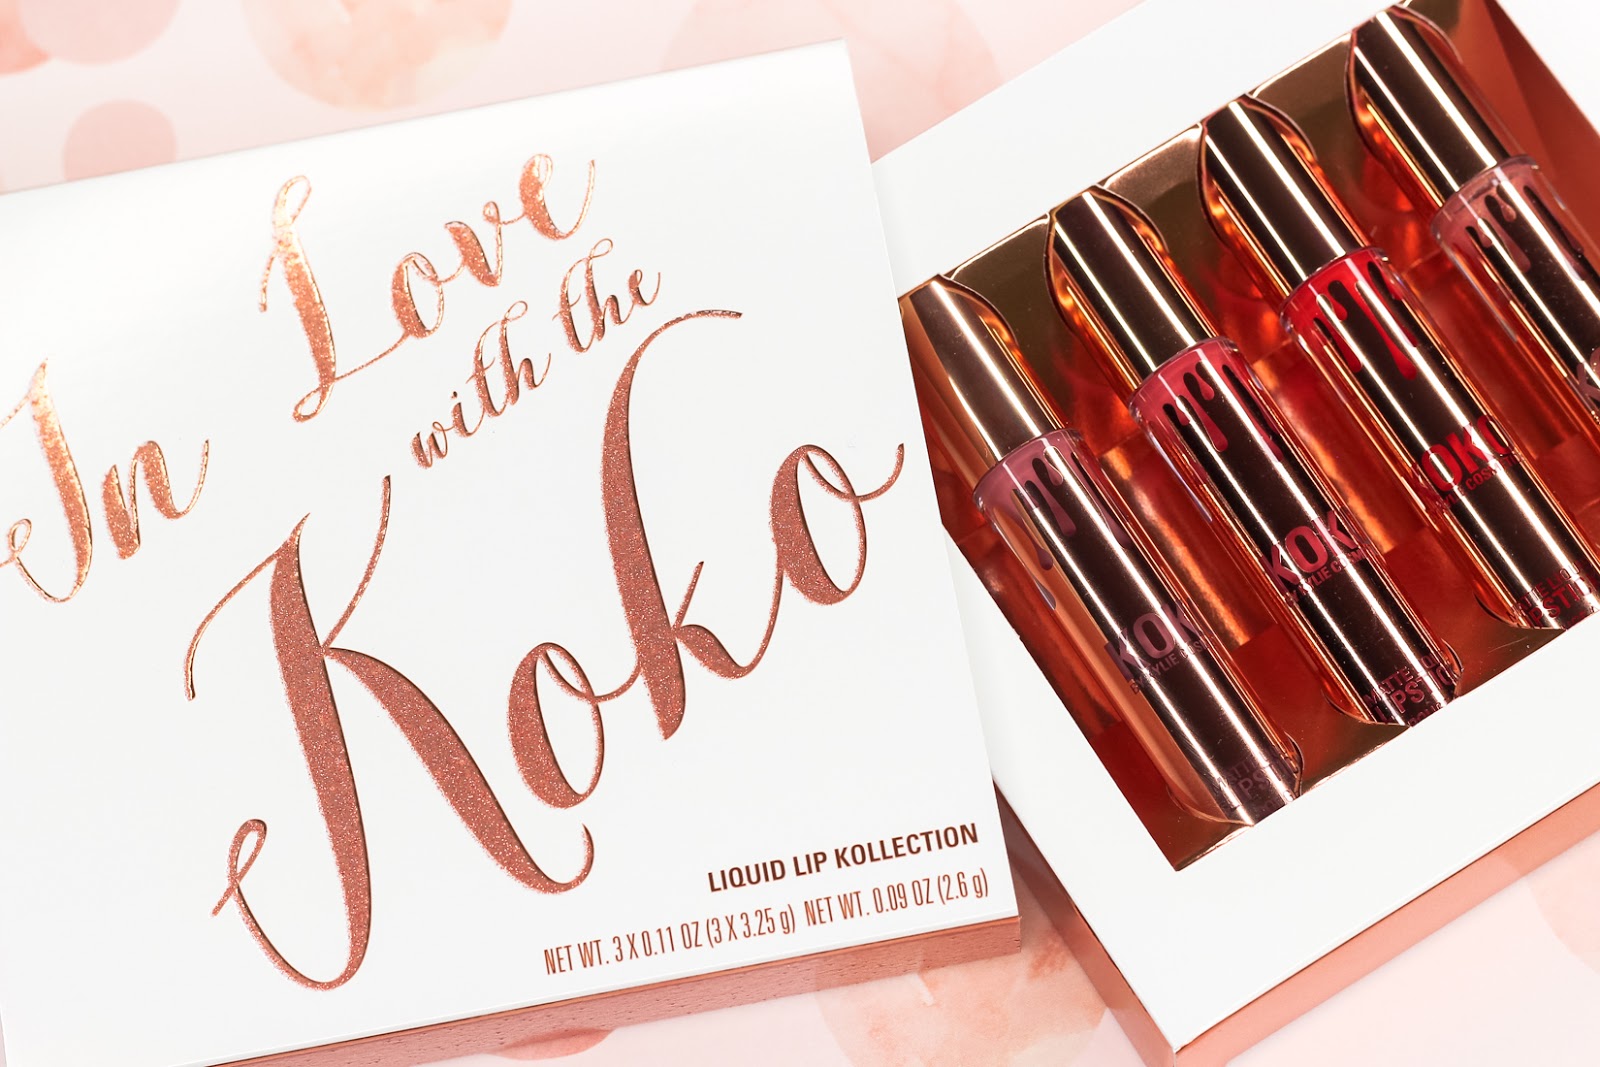 Kylie Cosmetics IN LOVE WITH THE KOKO